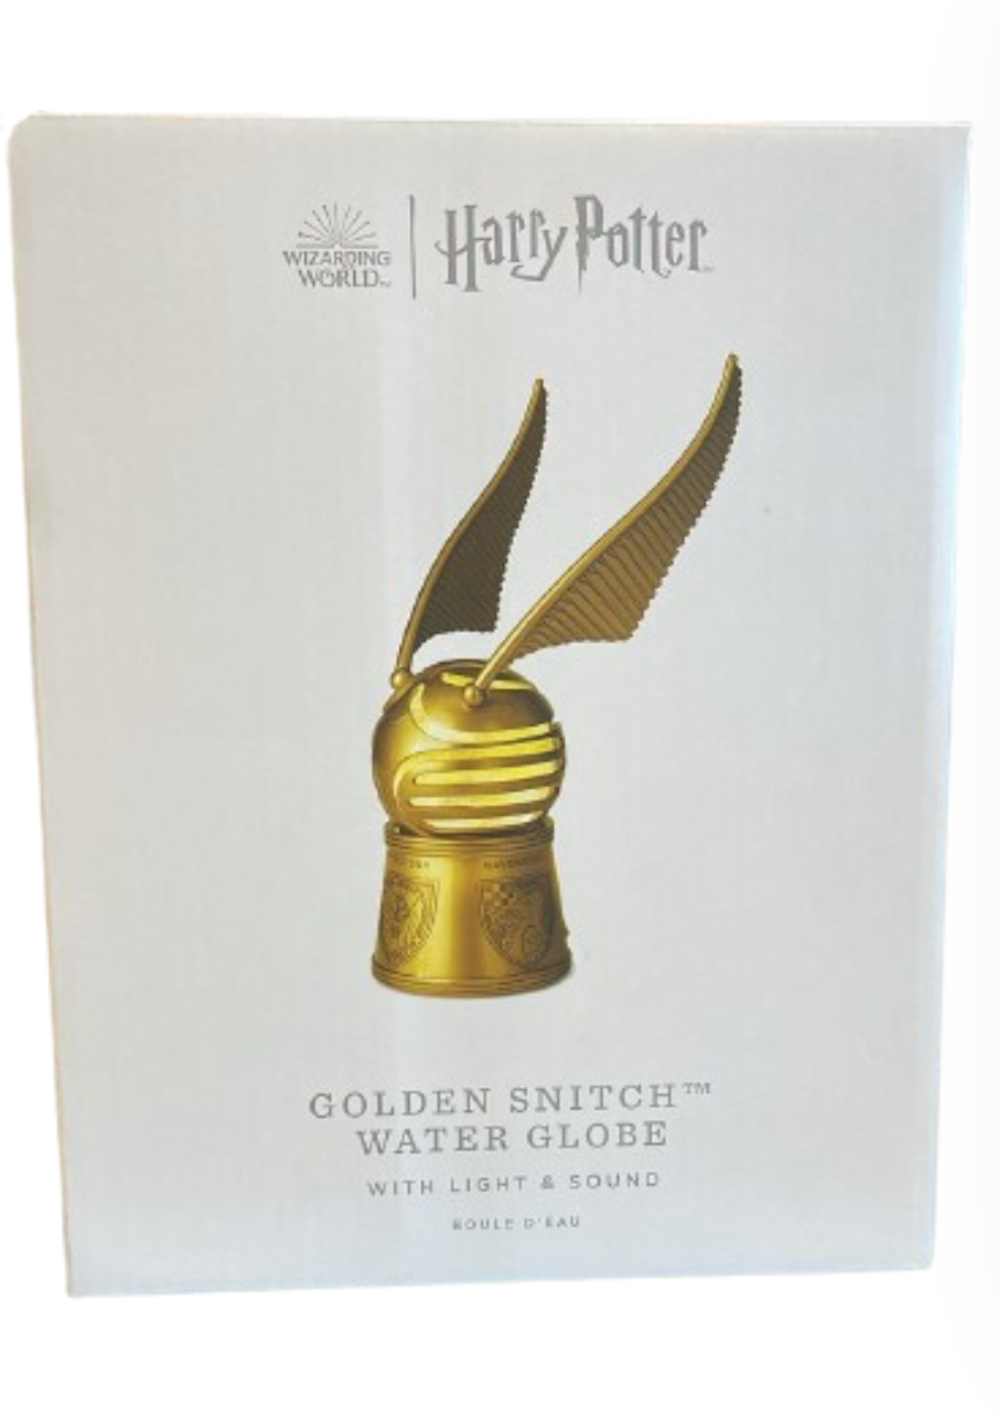 Hallmark Harry Potter Golden Snitch Water Globe With Sound and Light New w Box